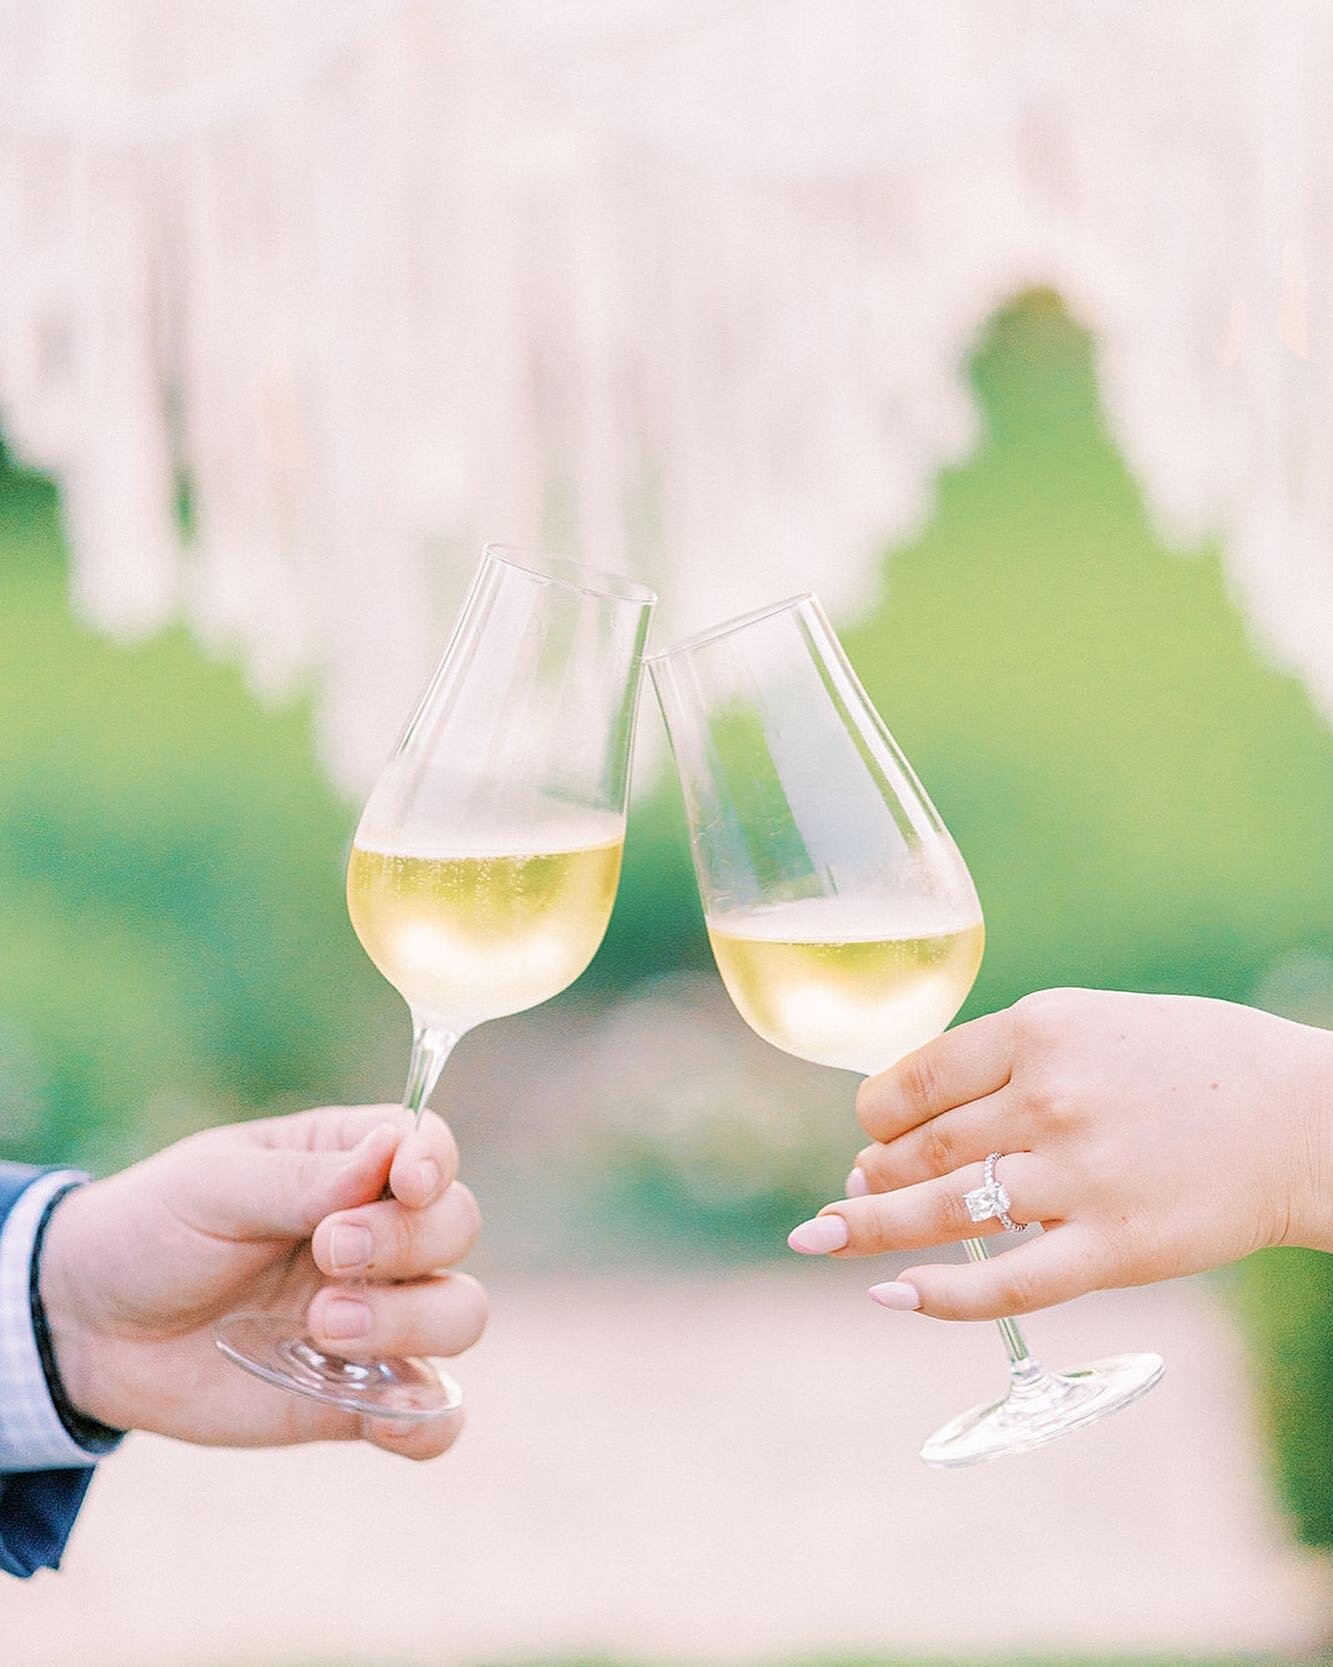 THE DETAILS MATTER, no matter how big or small!⁠⁠
⁠⁠
From florals to location, we are here to guide you through every step and every detail in order to make sure your proposal is perfect for the two of you.⁠⁠
⁠⁠
❤️ Drinks - Whether you both love champagne, beer, or a refreshing mock-tail, it's important to cheers in celebratory fashion!⁠⁠
⁠⁠
❤️ Candles - Day or night, candles will set the scene and create the perfect ambience for your lasting experience.⁠⁠
⁠⁠
❤️ Balloons - They are, after all, the universal symbol for celebrations! We have wonderful local recommendations for balloon companies that can take your event 0 to 60 with stunning balloon designs.⁠⁠
⁠⁠
What is a detail you could never leave out of your proposal experience, aside from the ring of course? Let us know below ⁠⁠
⁠⁠
_⁠⁠
Proposal Design: @amore_austin⁠⁠
Photography: @sarahtribettphoto⁠⁠
Location: @commodoreperryauberfe⁠⁠